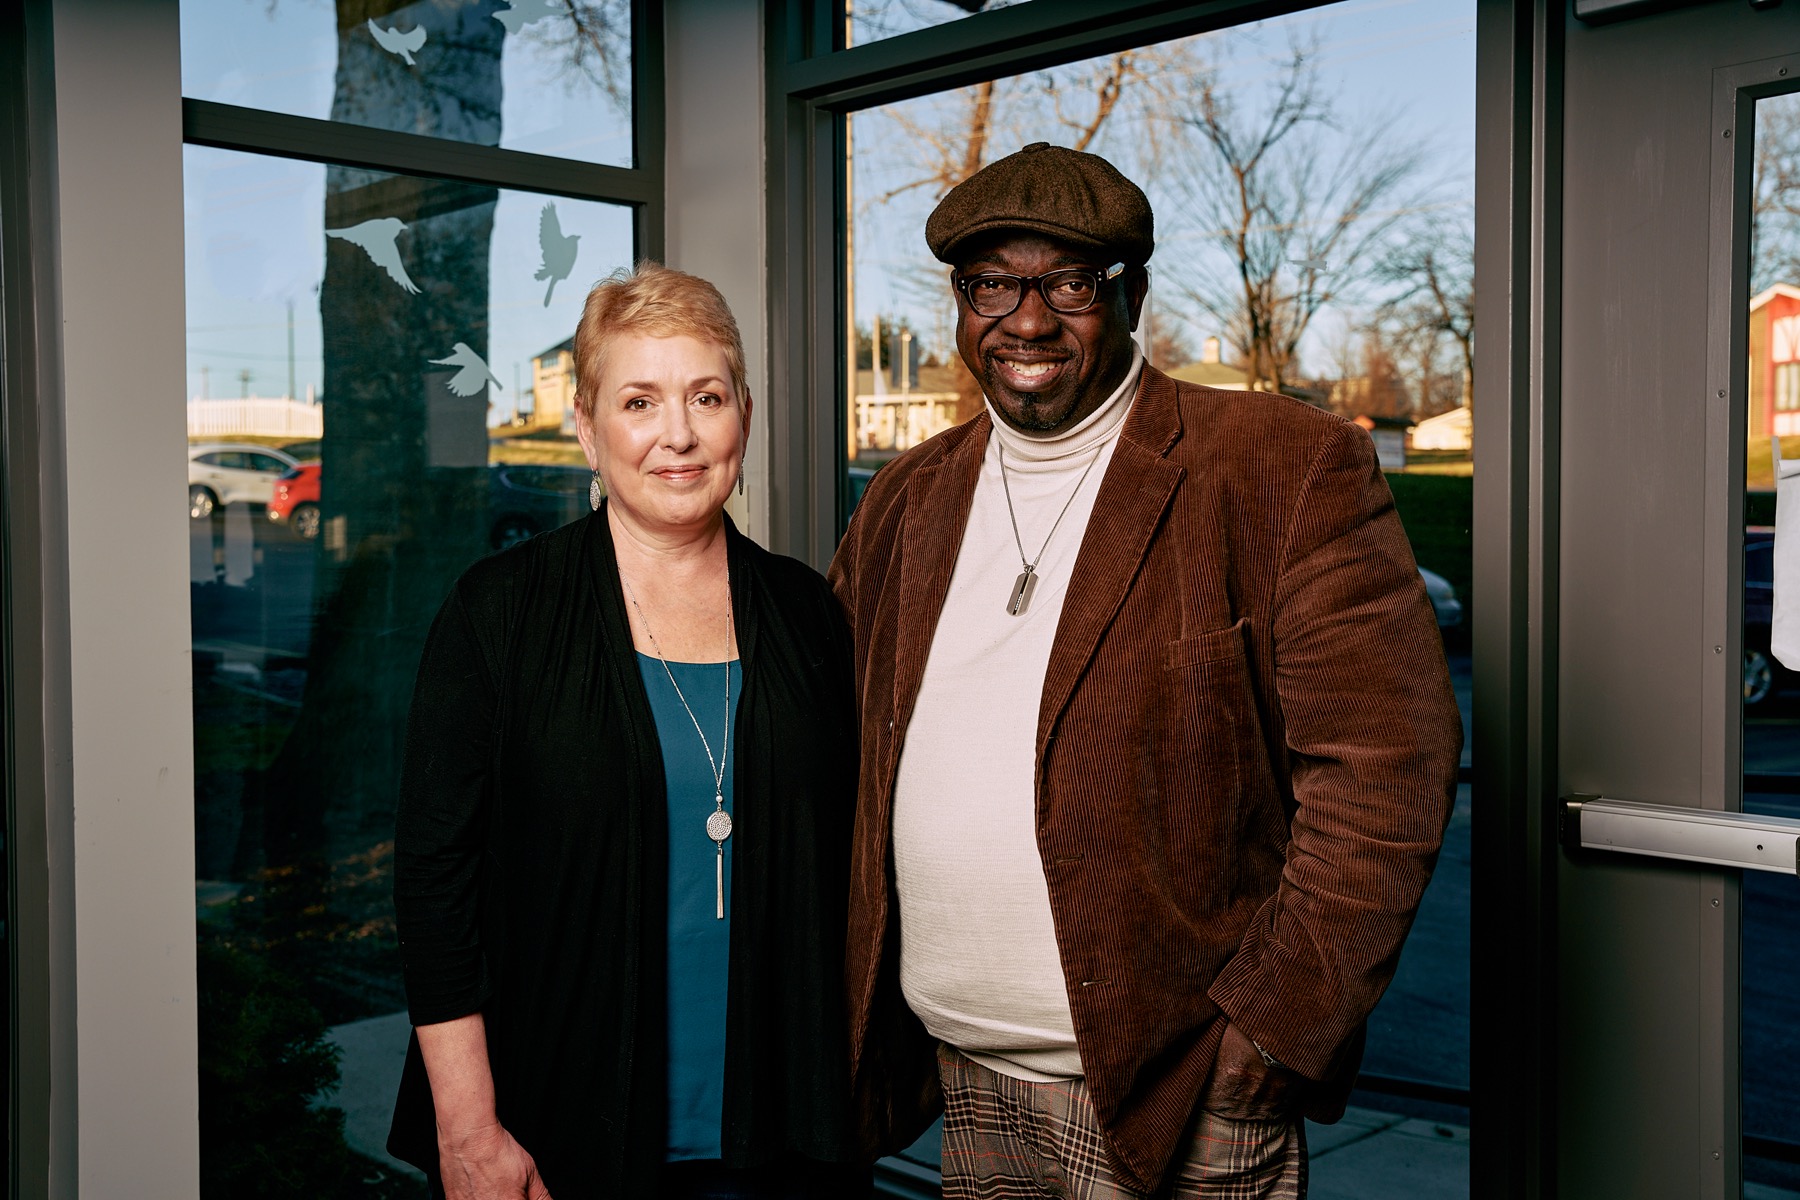 an older white woman with short blonde hair and an older black man wearing a newsy cap stand next to each other outside a building smiling at a camera